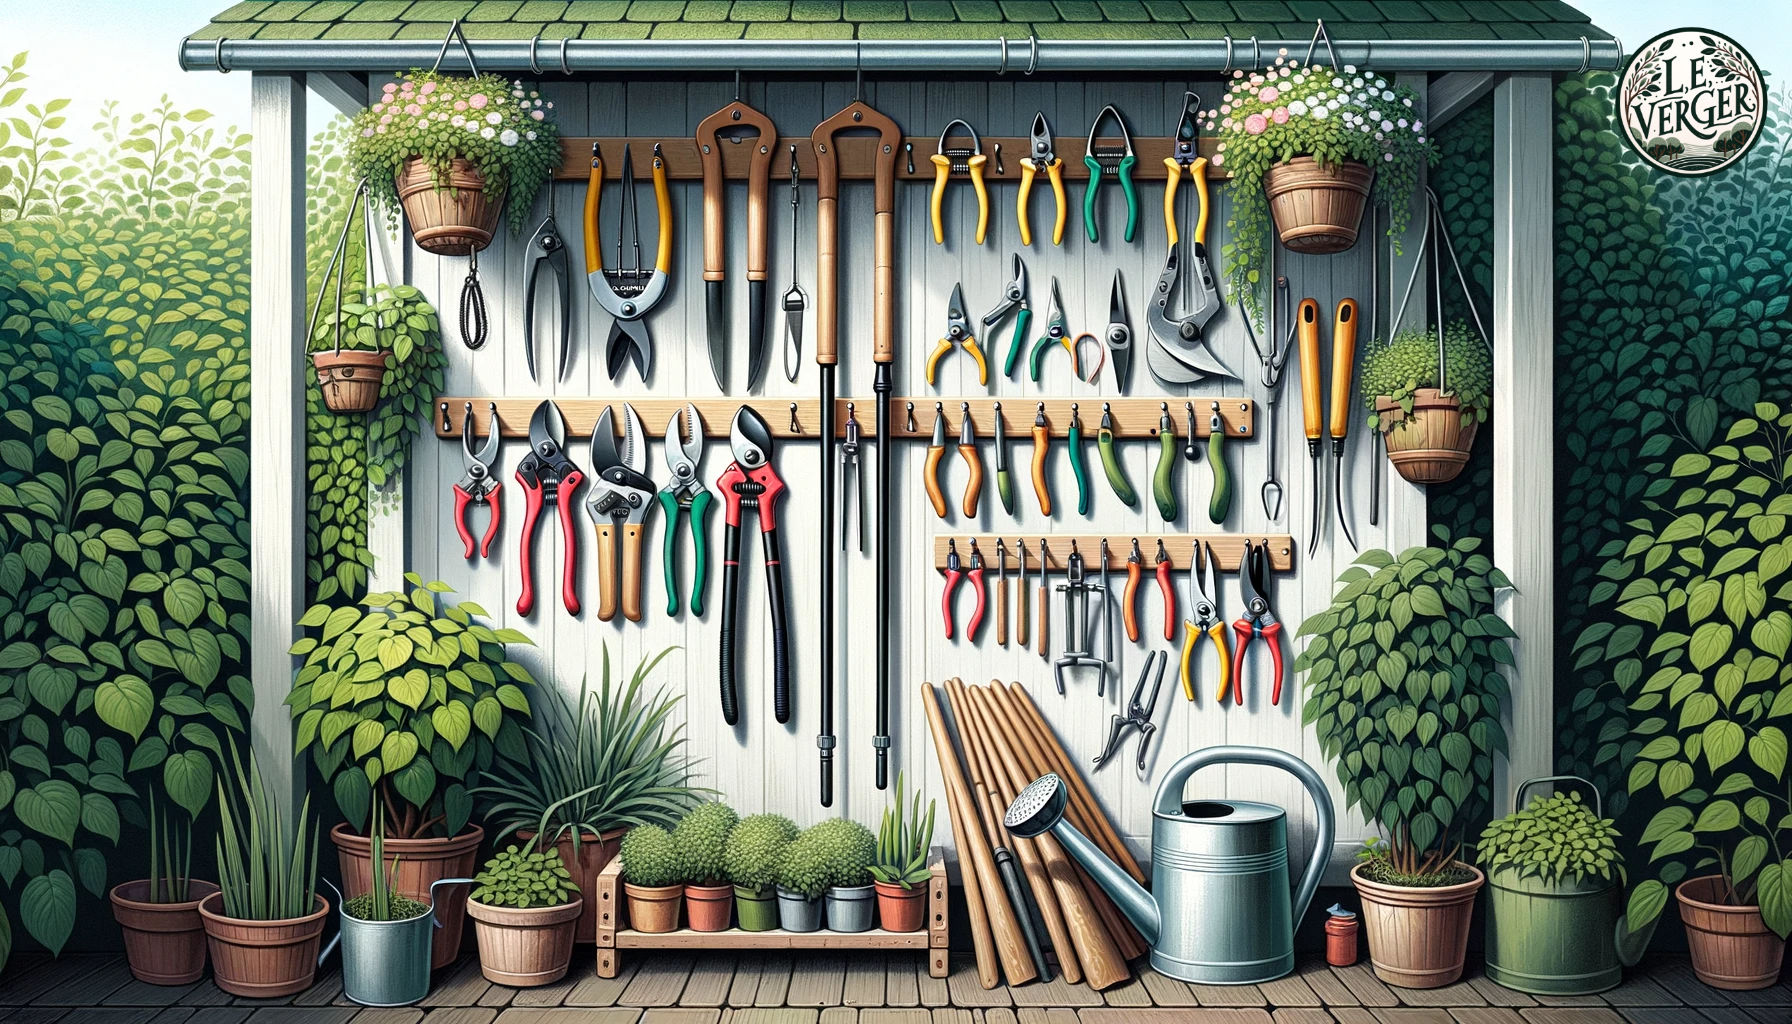 Illustration, wide aspect: An organized tool rack hanging on a shed wall with each of the pruning tools: shears, pole pruners, loppers, pruning saws, hand pruners, and secateurs. Surrounding the rack are hanging plants and a watering can, setting the scene in a gardening environment.